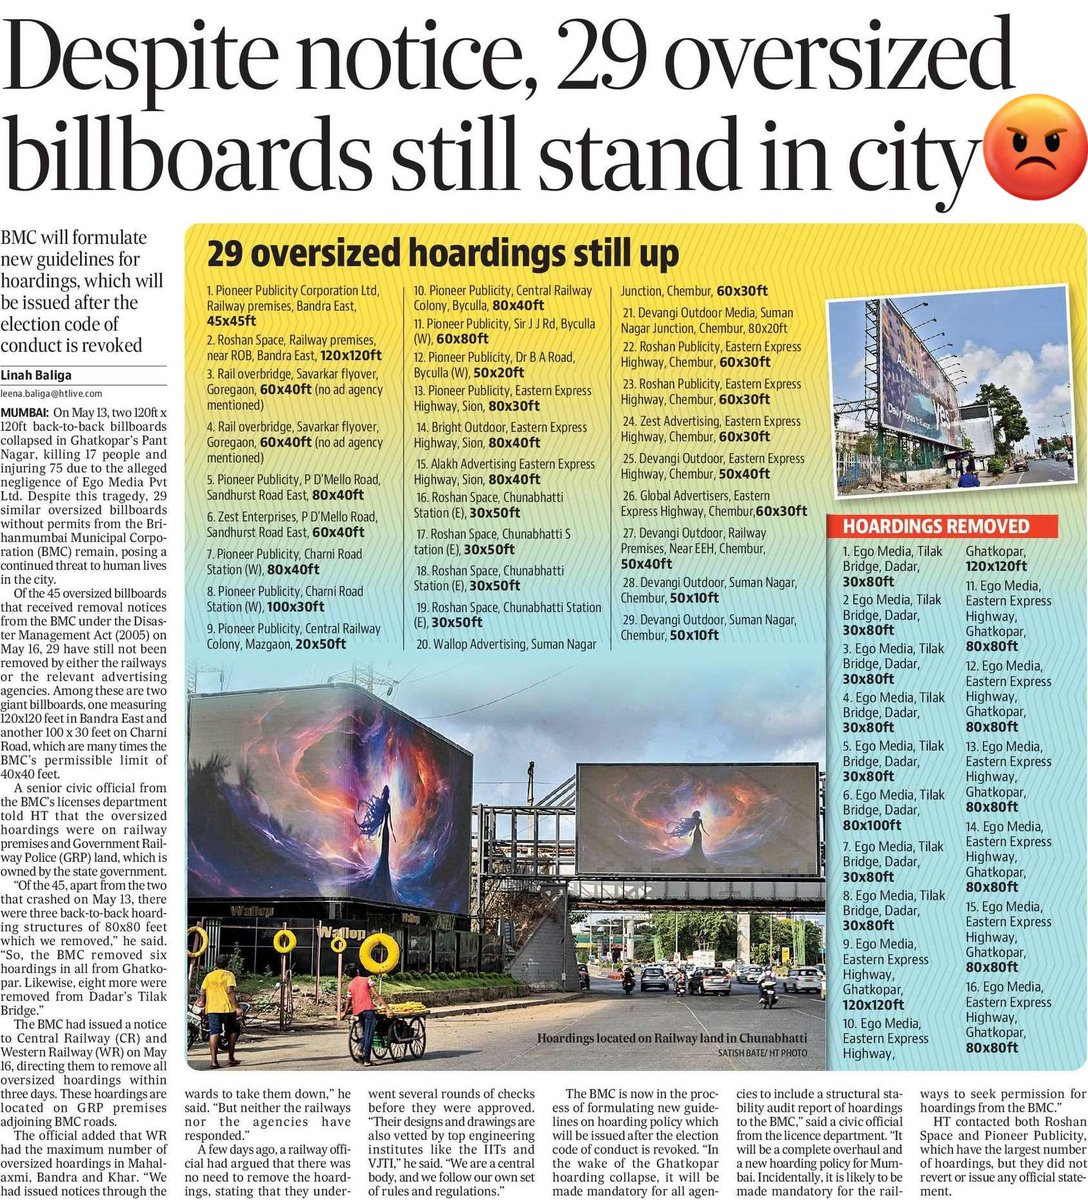 Despite Notices, 29 Oversized Billboards Still Stand in the City.

@mybmc take action before it's too late. 

Report by @linahOlinah in today's  @HTMumbai